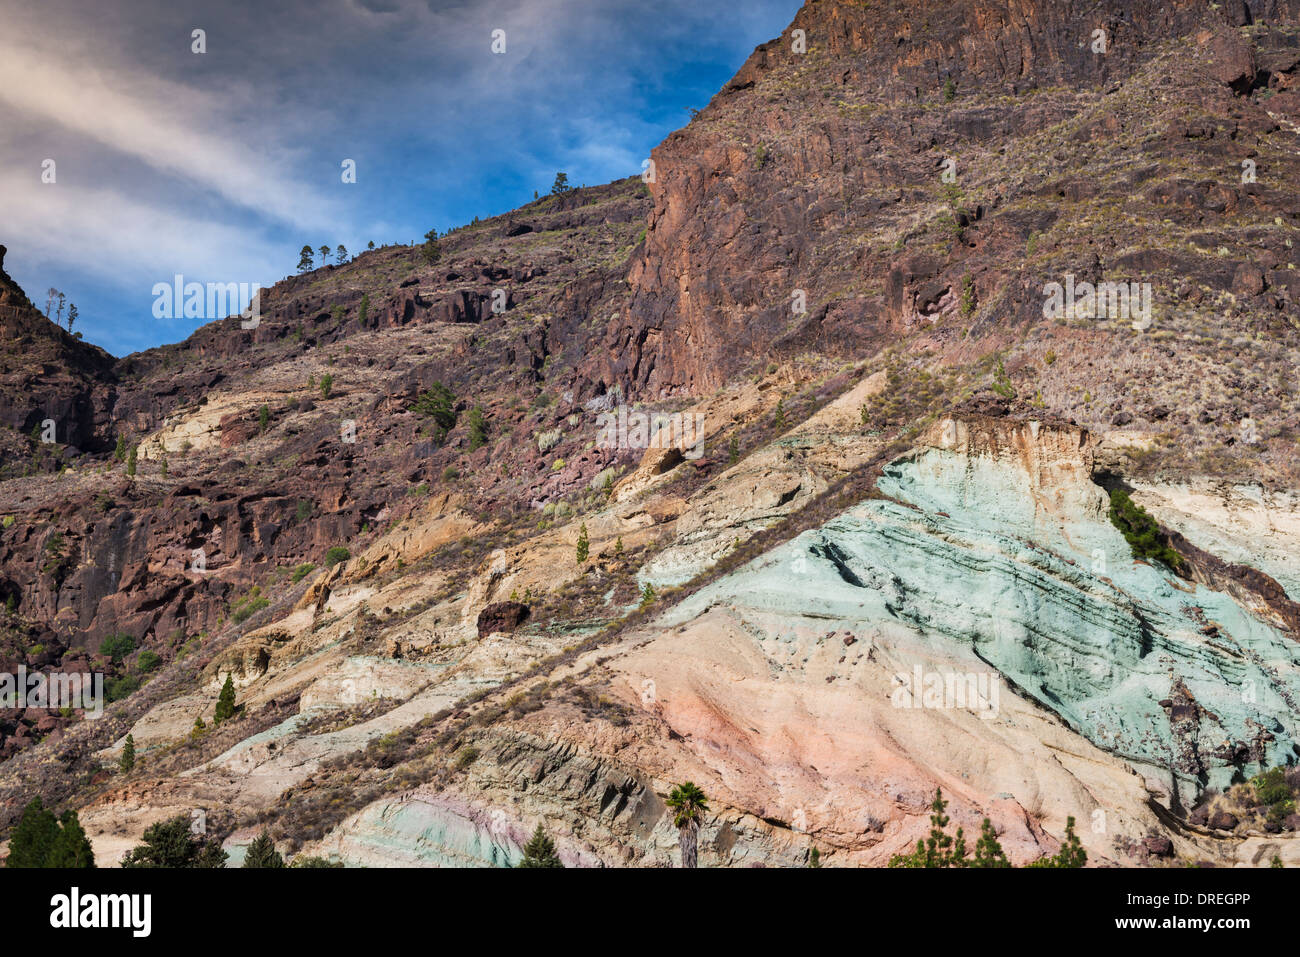 Colour-banded, hydrothermally altered volcanic rocks at Los Azulejos, Mogan, Gran Canaria, Canary Islands Stock Photo